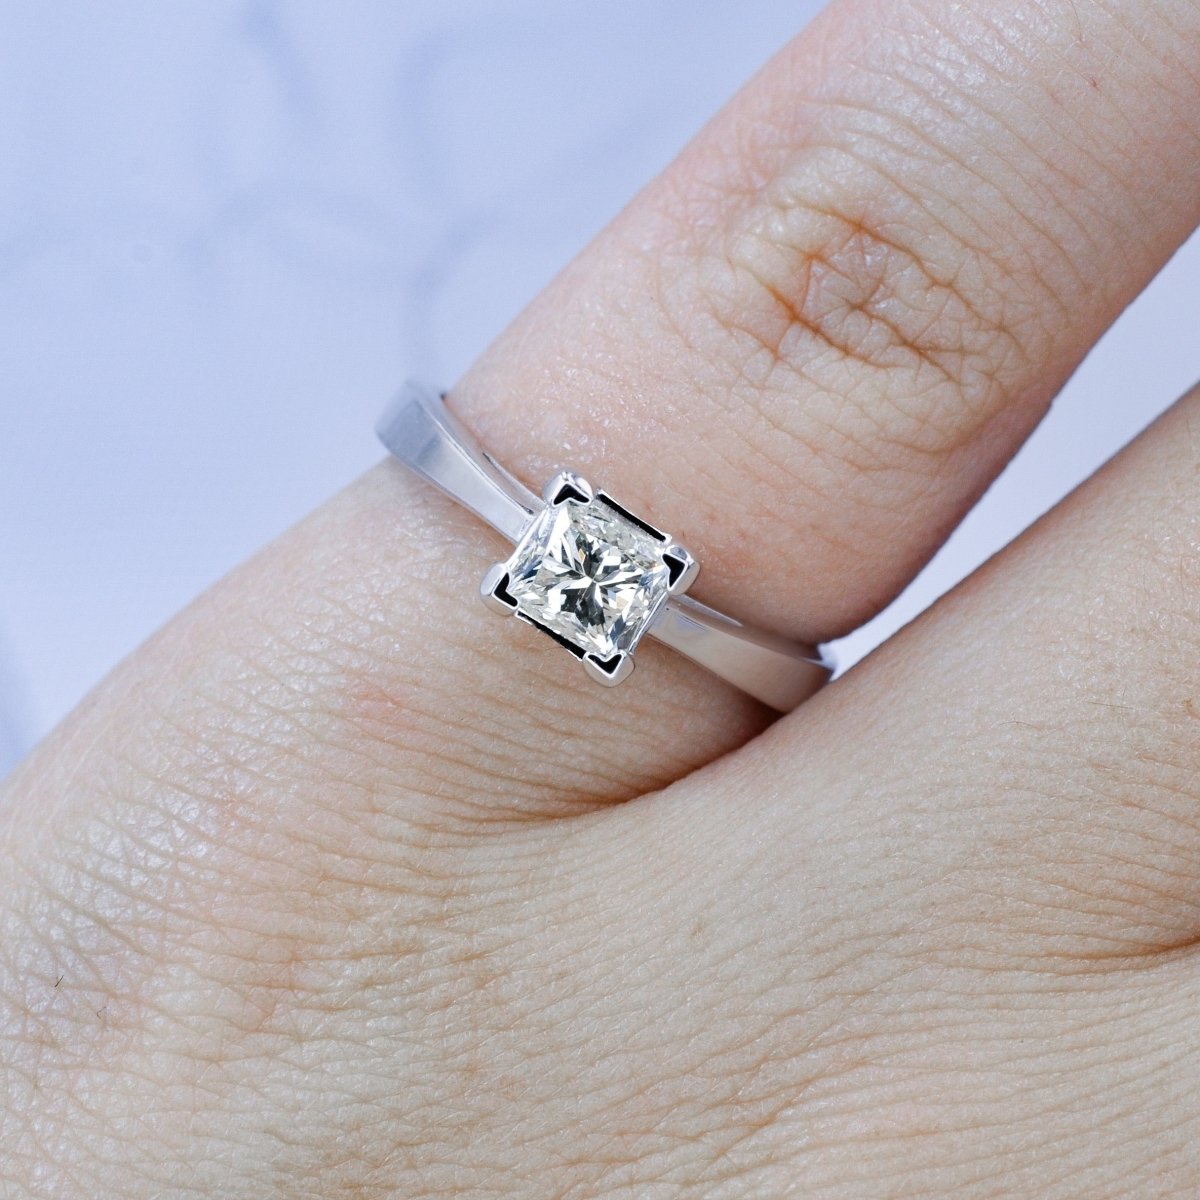 Special 0.80 CT Princess Cut Diamond Solitaire Ring in 14KT White Gold - Primestyle.com